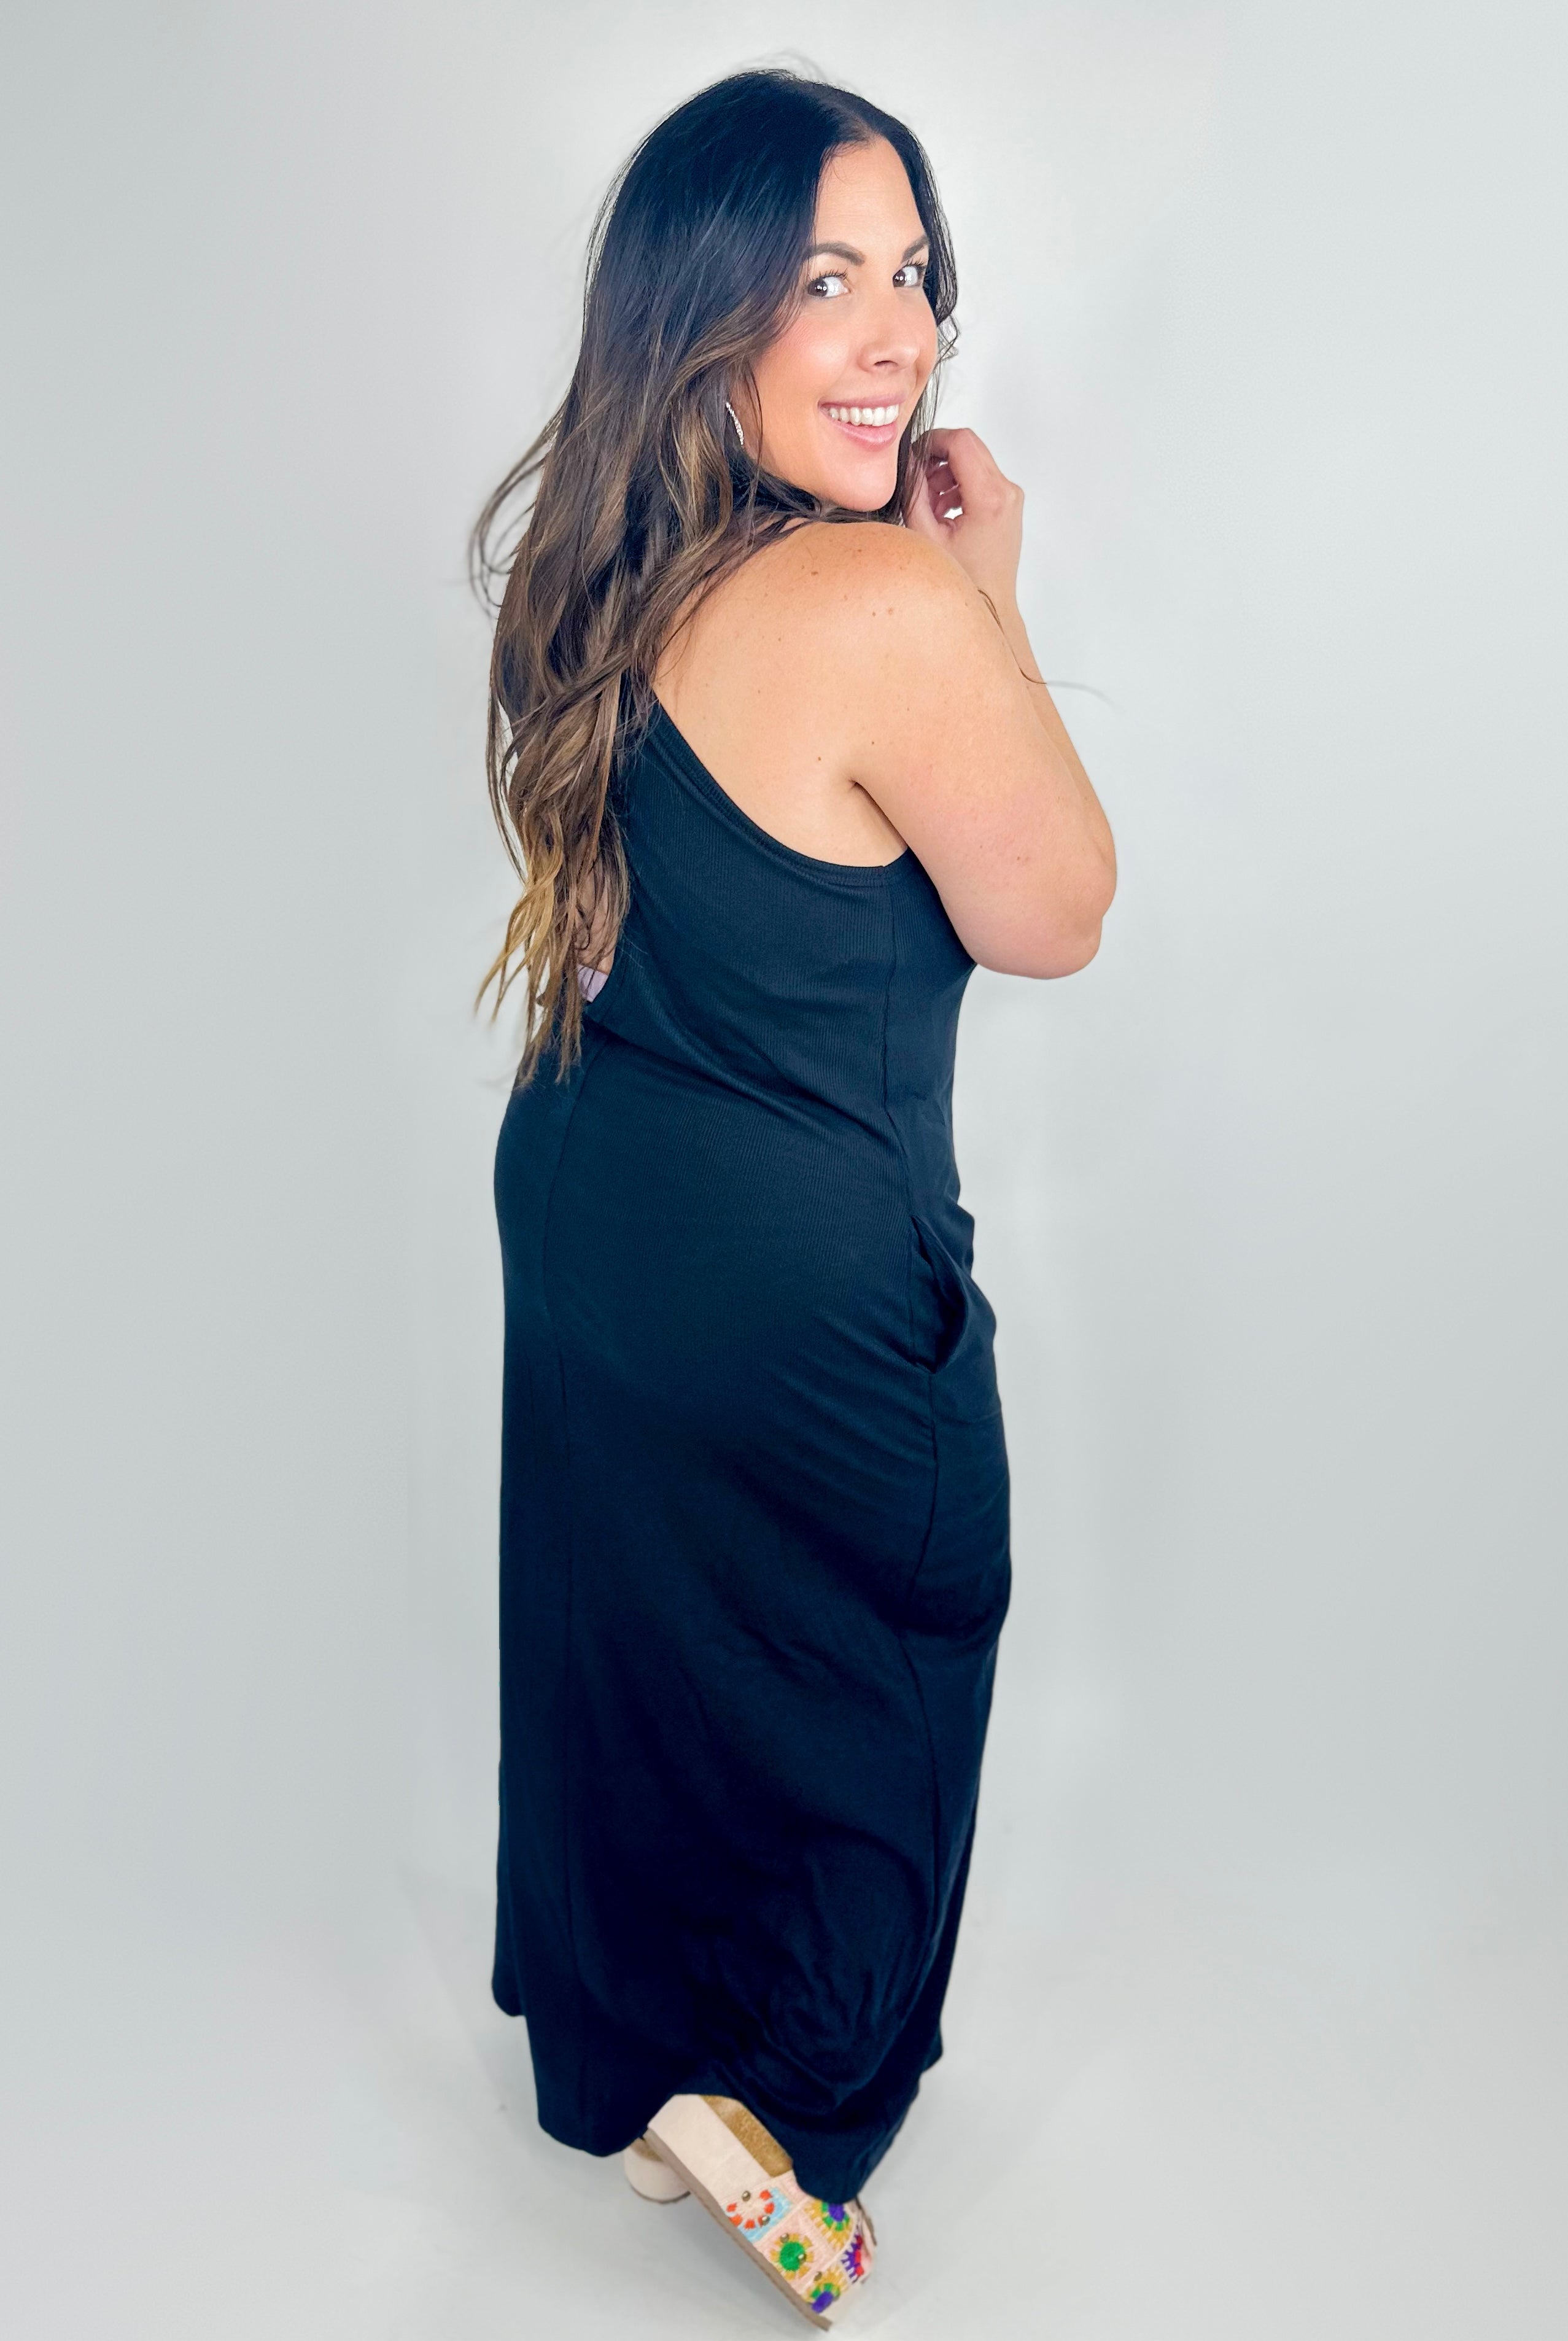 RESTOCK: Am I the Drama Maxi Dress-230 Dresses/Jumpsuits/Rompers-Culture Code-Heathered Boho Boutique, Women's Fashion and Accessories in Palmetto, FL